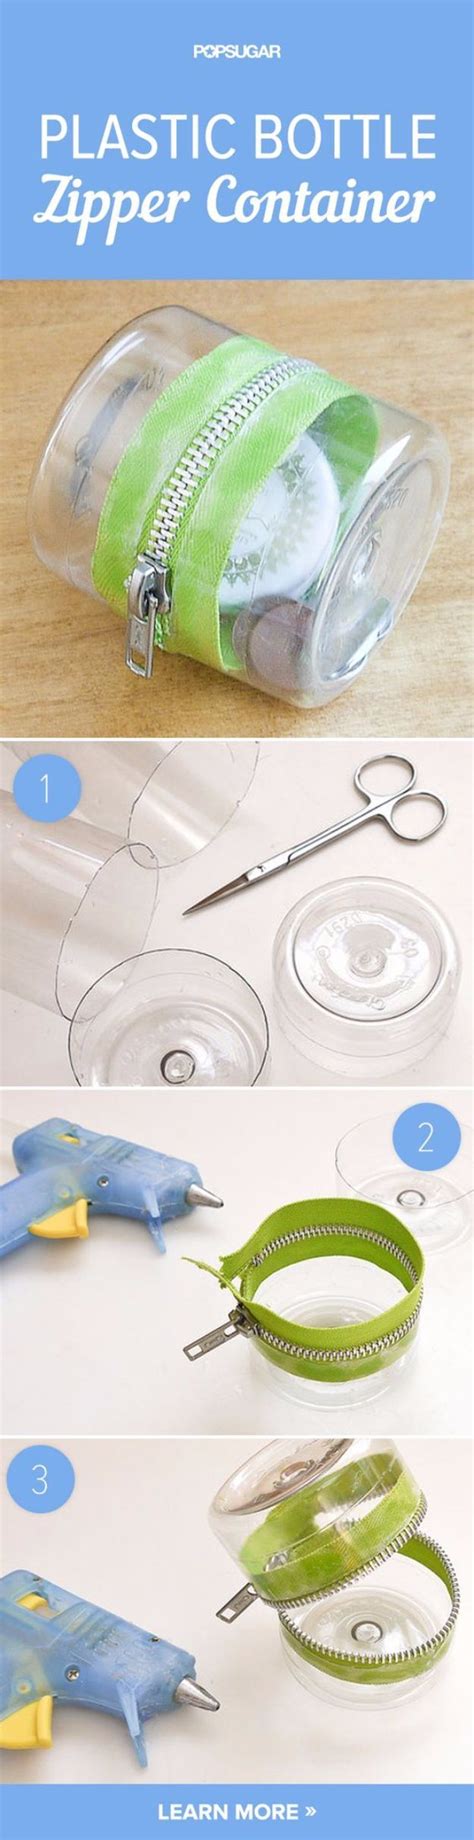 The Instructions For How To Make A Plastic Bottle Zipper Container